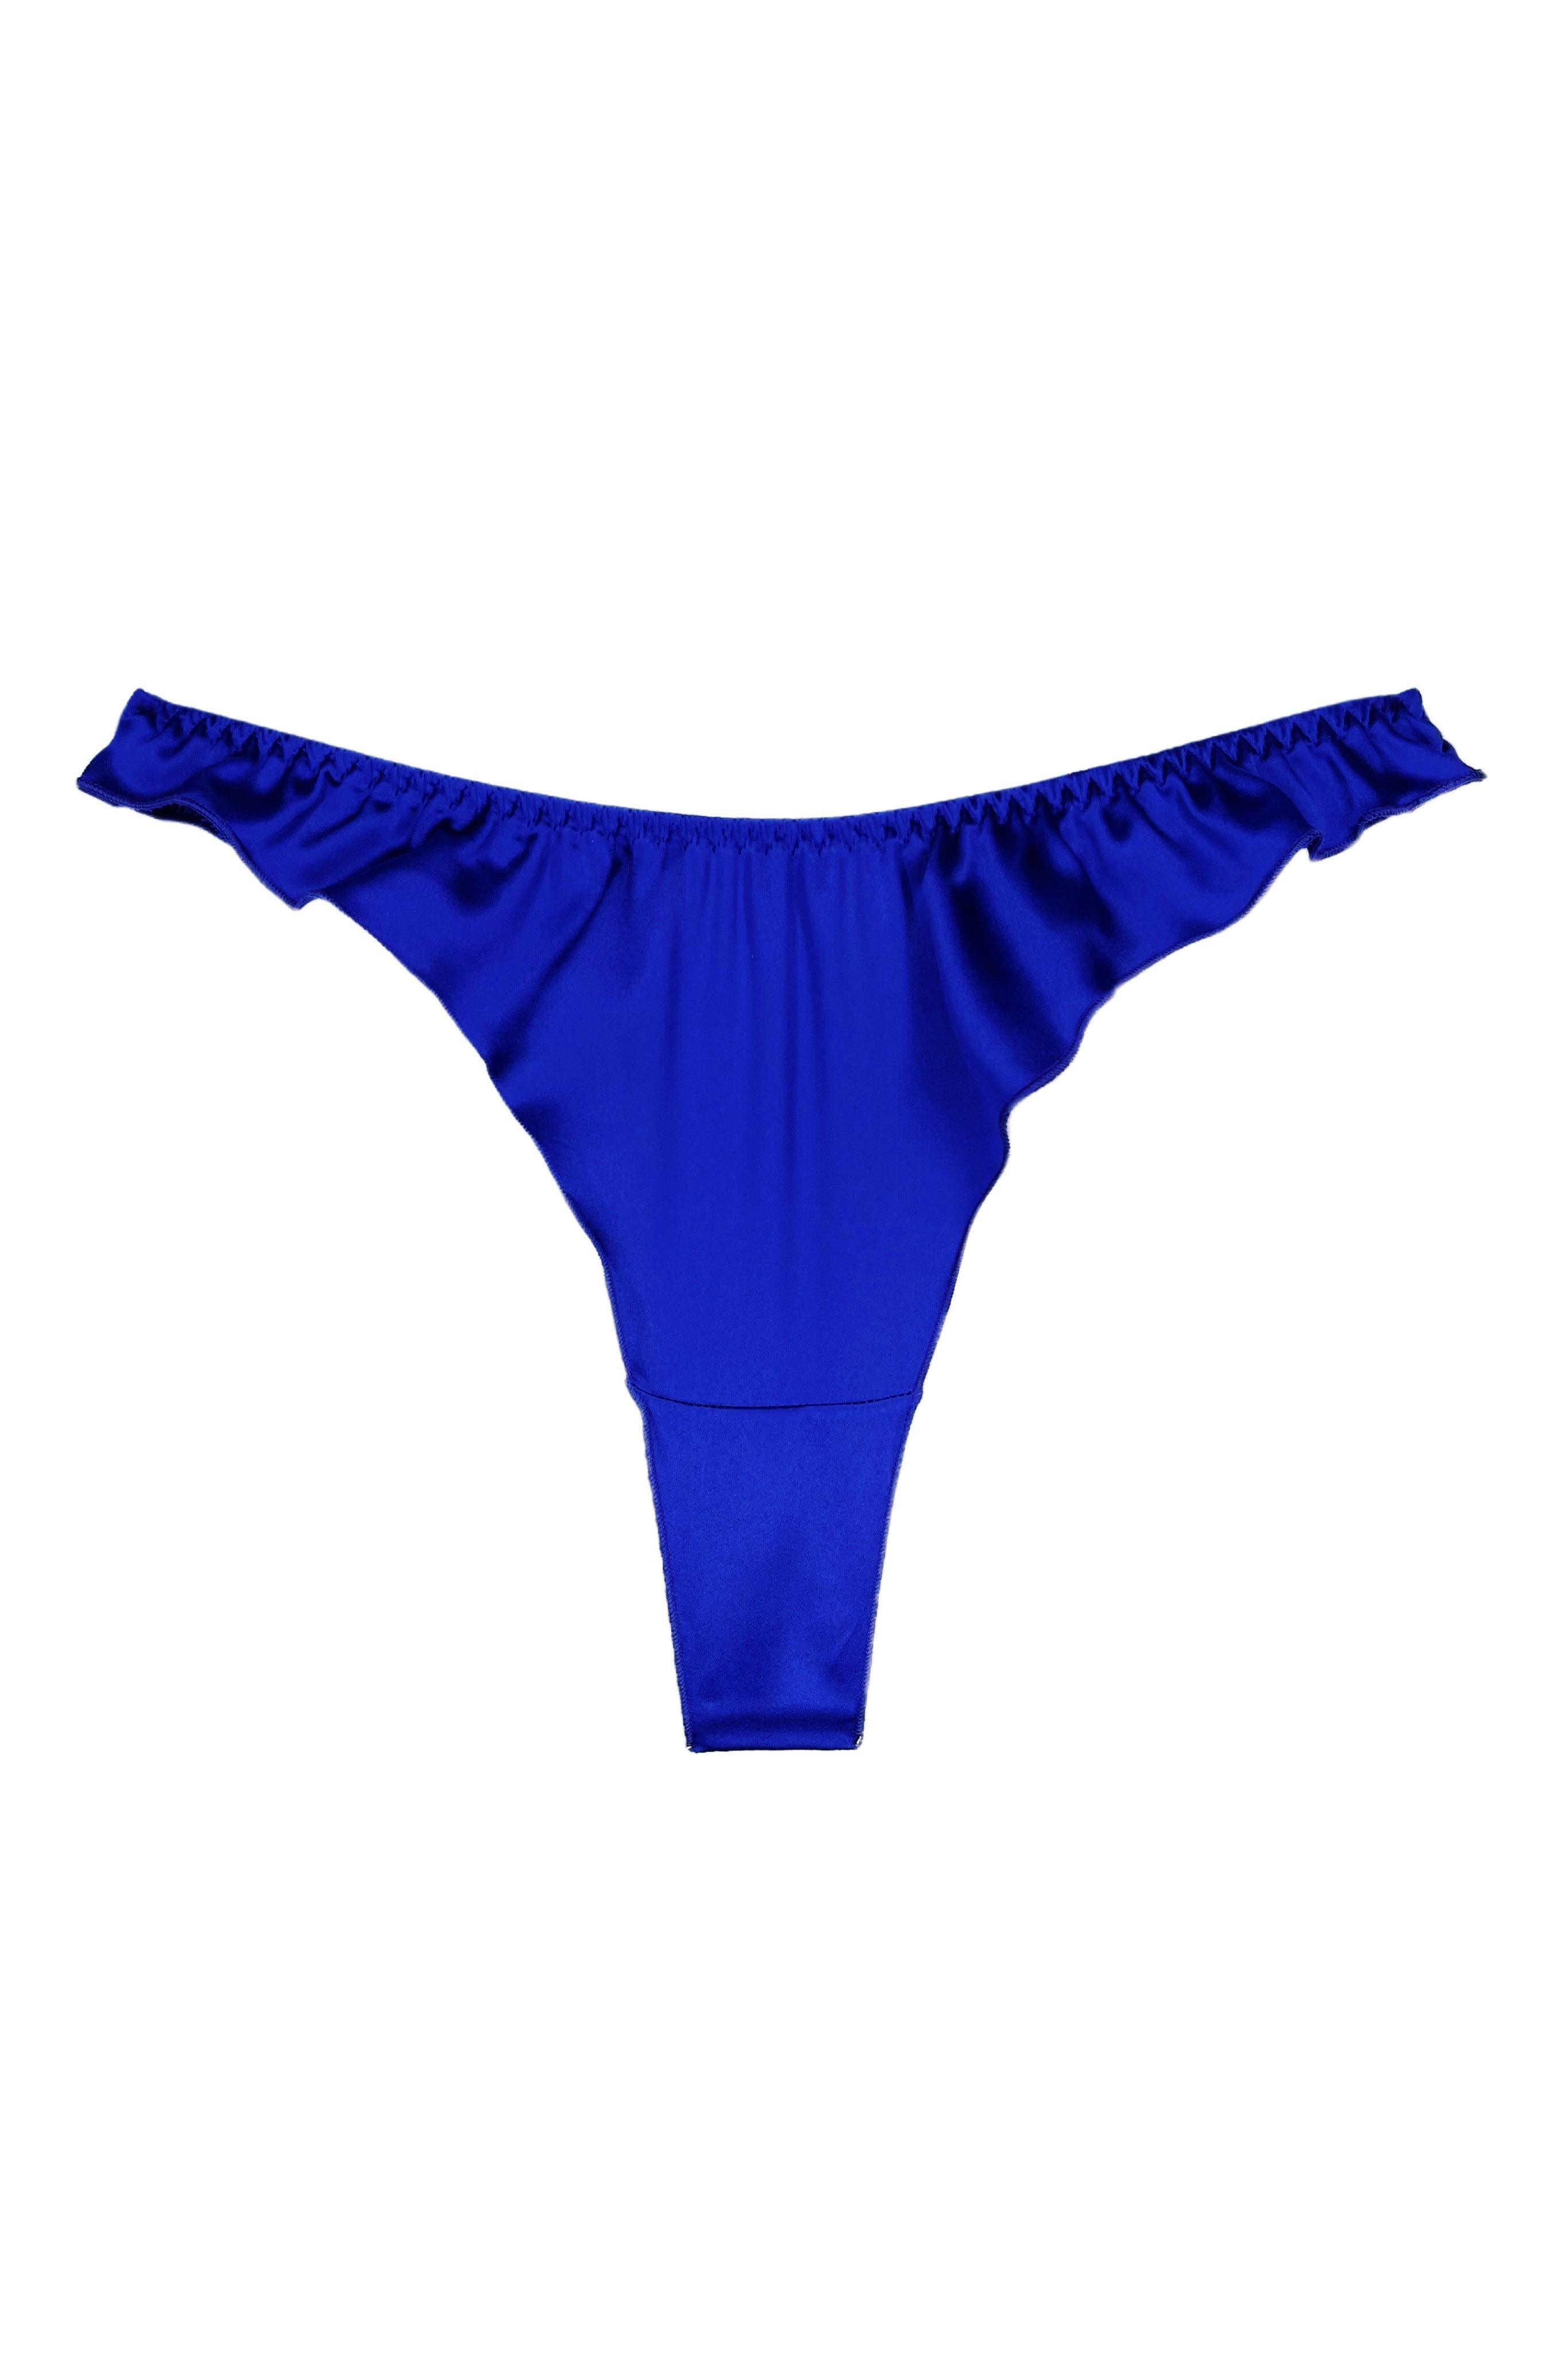 Butterfly Electric blue thongs - yesUndress